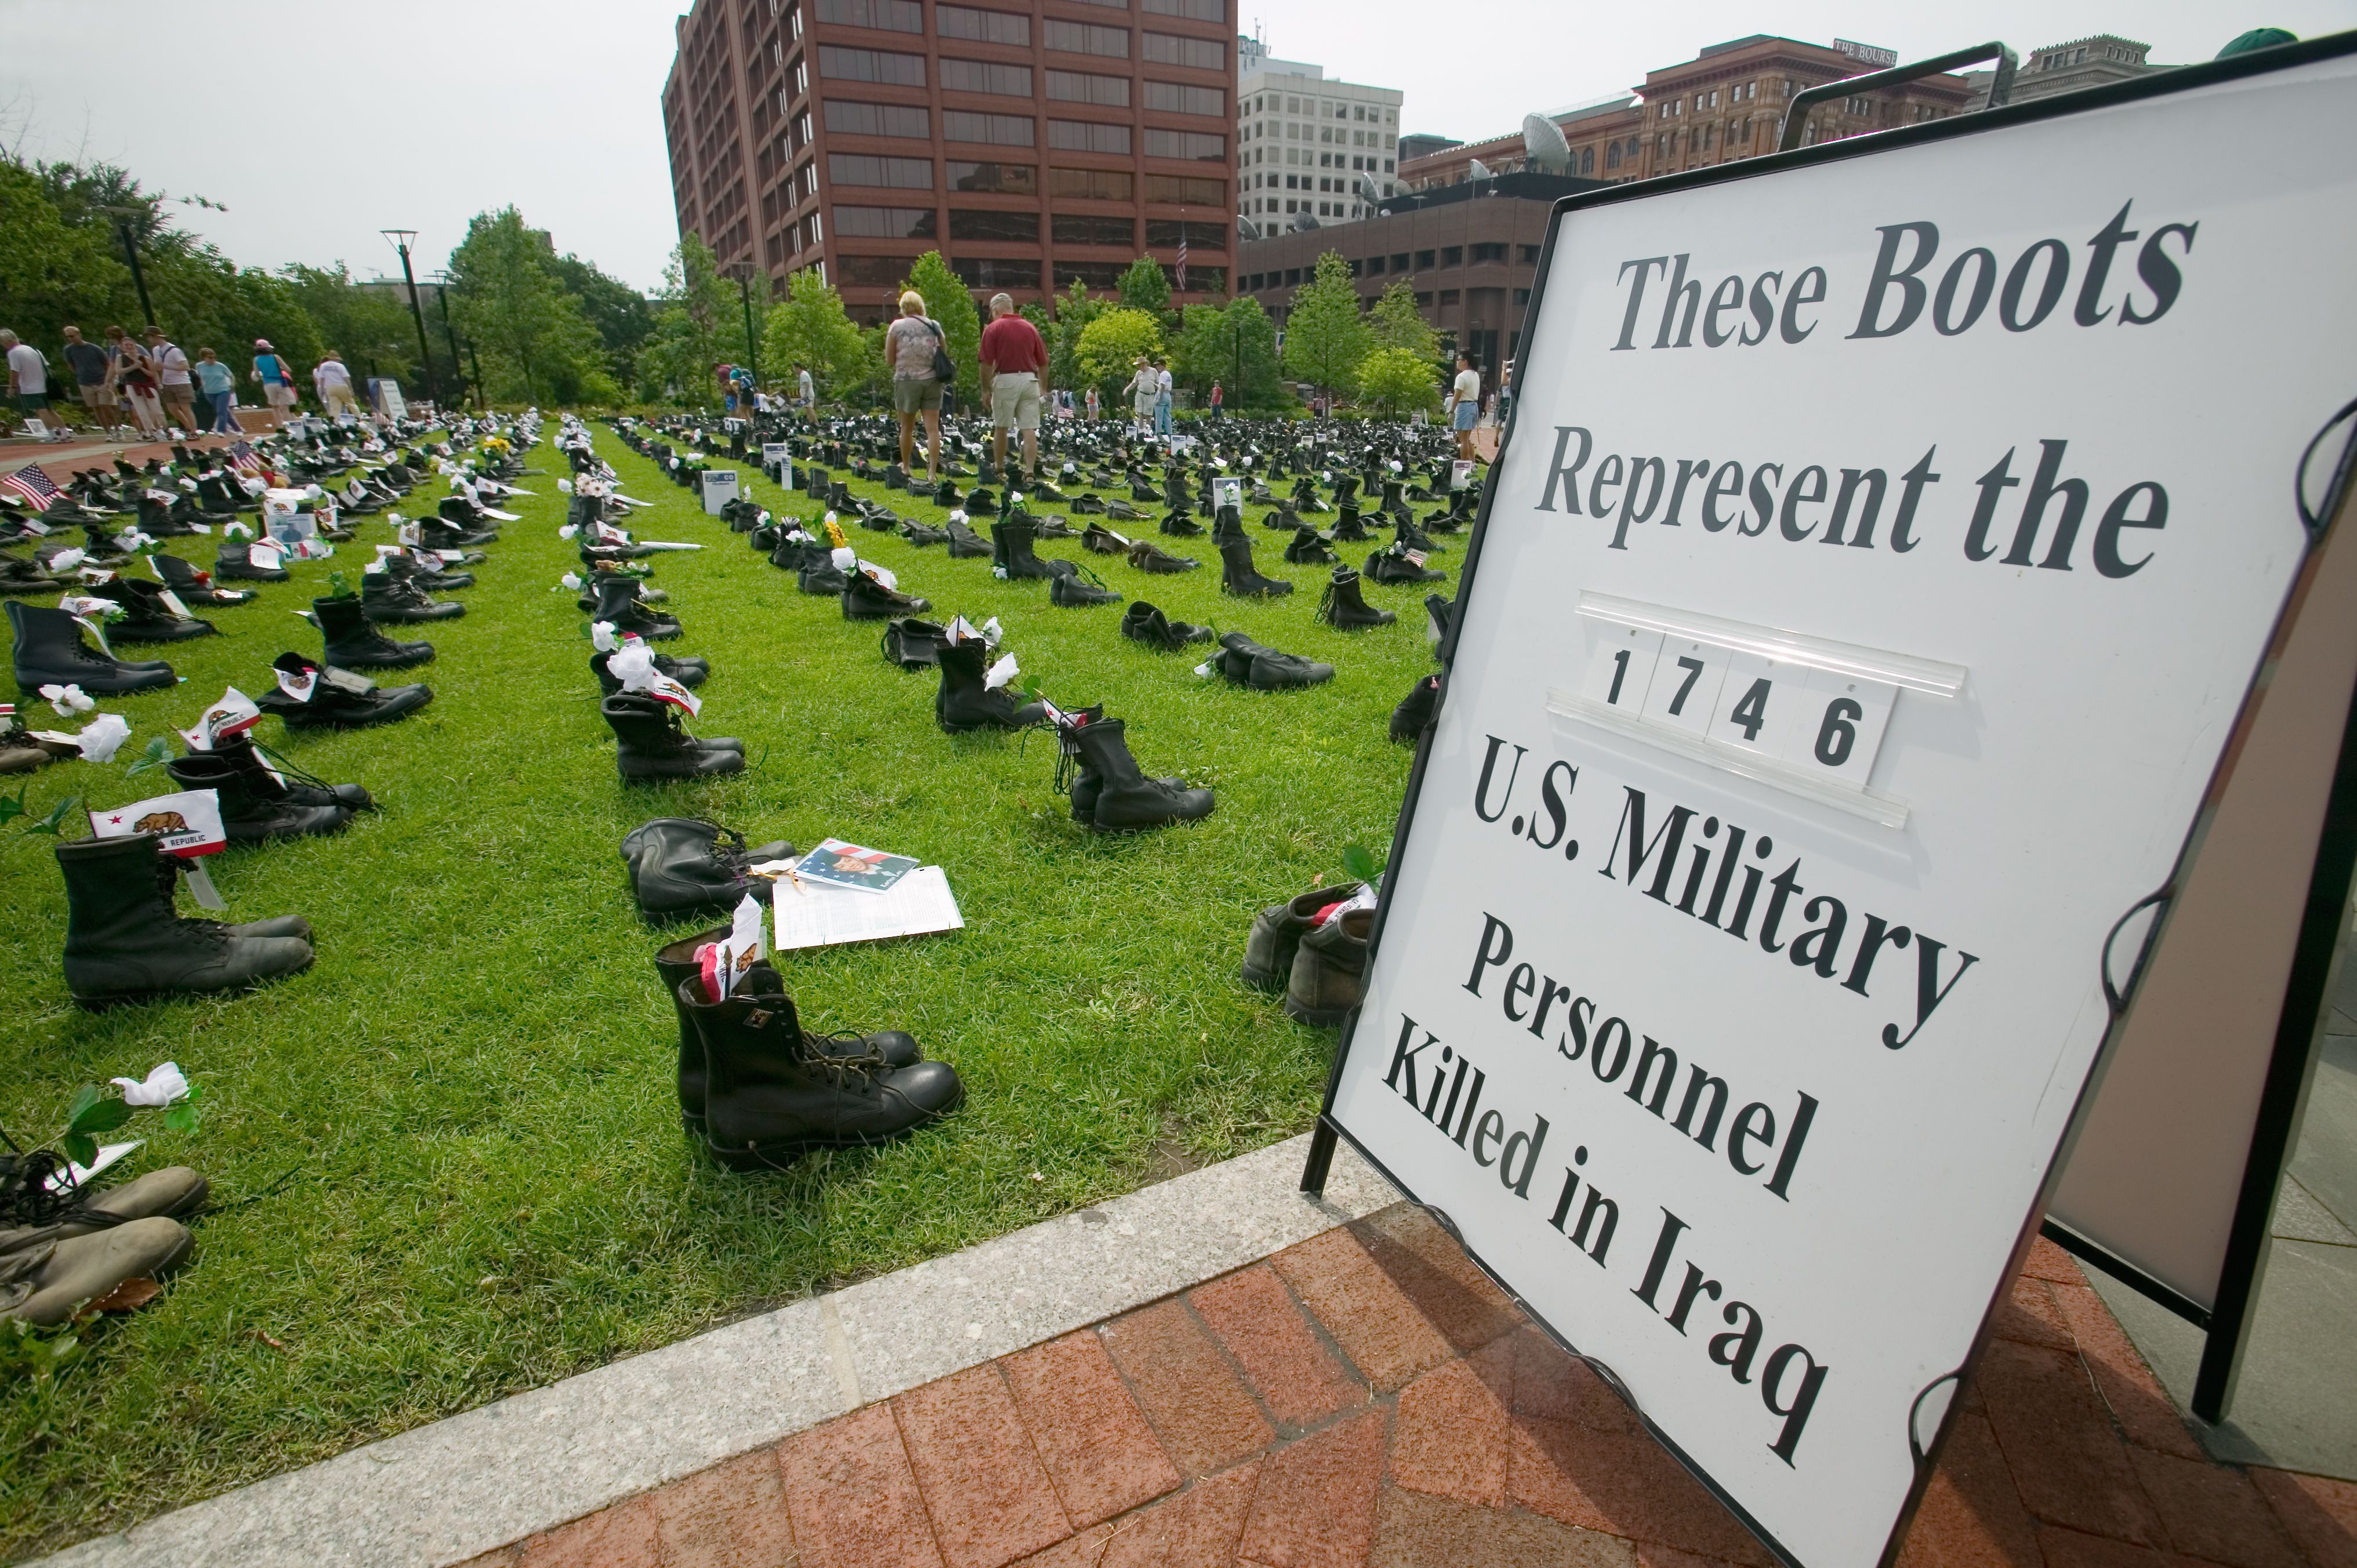 Military boots symbolizing US Military Personnel killed in Iraq as displayed at Independence Hall "Eyes Wide Open" exhibit, Philadelphia, Pennsylvania on July 4, 2005